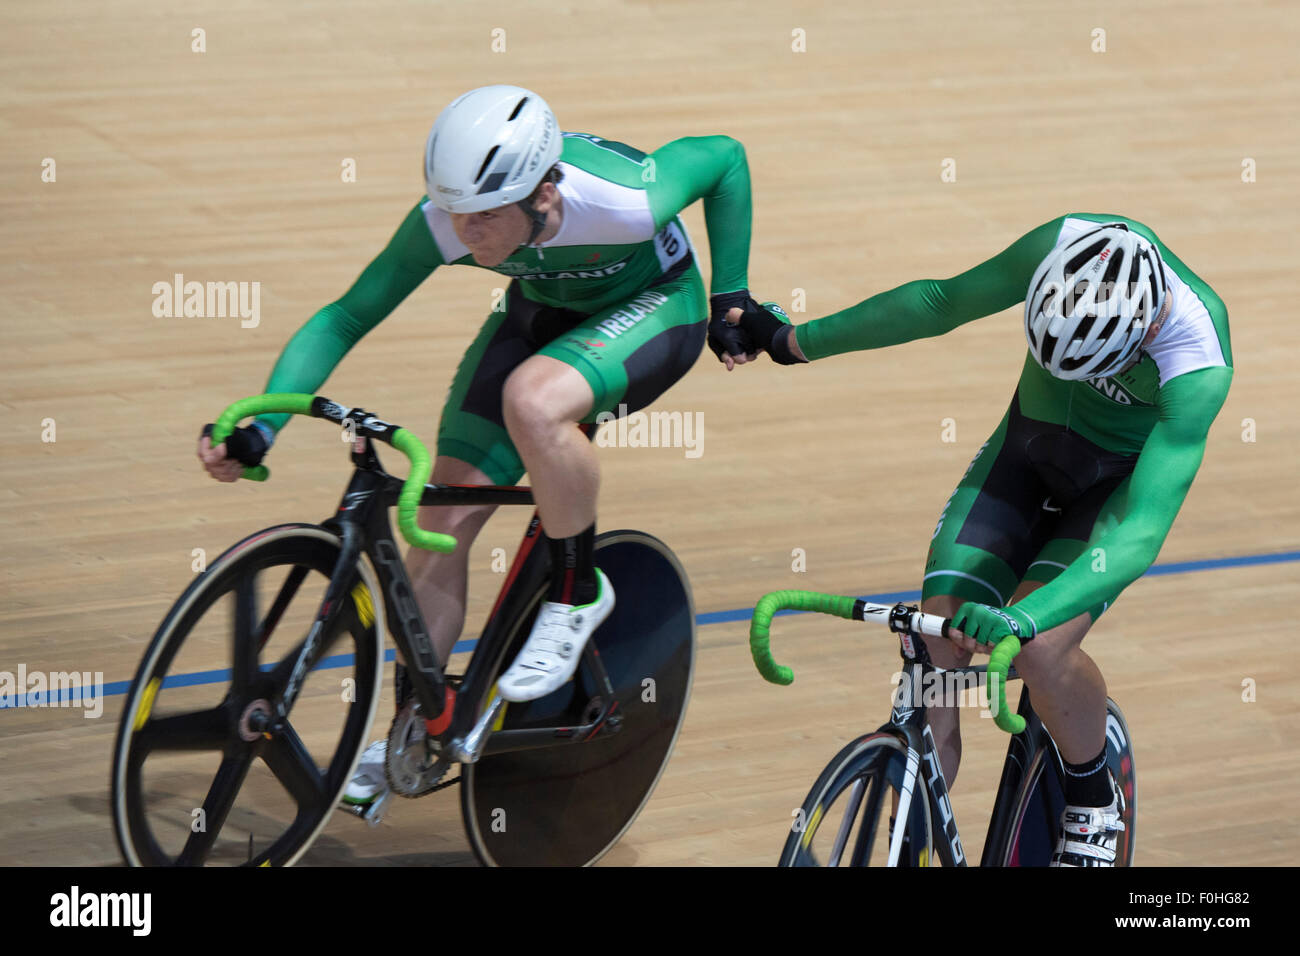 Derby, UK. 16th Aug, 2015. The Irish pair of Mark Downey and Fintan Ryan conduct a handsling changeover during the madison event at the Revolution Series at Derby Arena, Derby, United Kingdom on 16 August 2015. The Revolution Series is a professional track racing series featuring many of the world's best track cyclists. This event, taking place over 3 days from 14-16 August 2015, is an important preparation event for the Rio 2016 Olympic Games, allowing British riders to score qualifying points for the Games. Credit:  Andrew Peat/Alamy Live News Stock Photo